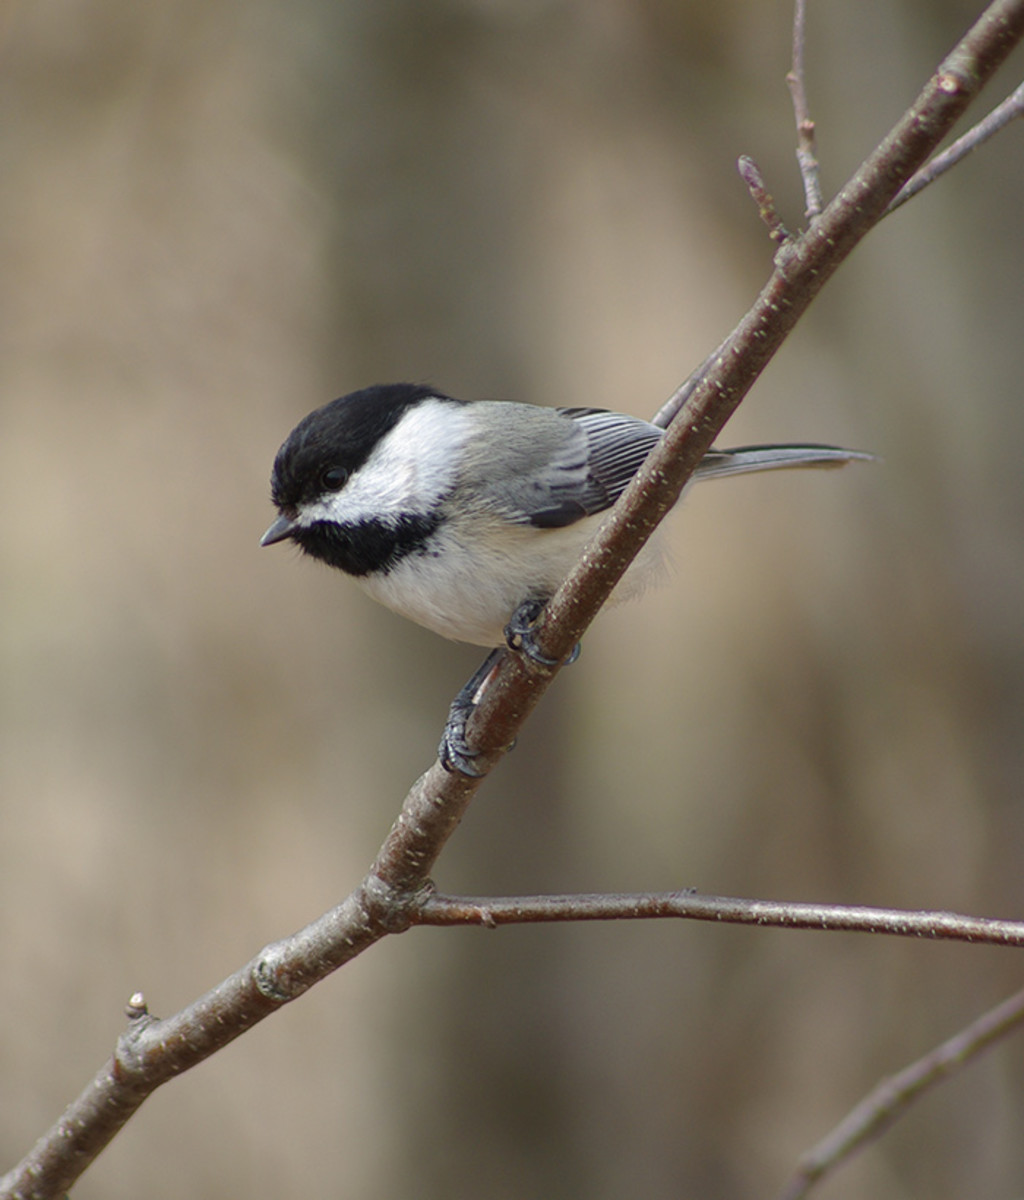 A black-capped chickadee needs many thousands of caterpillars to feed its young.